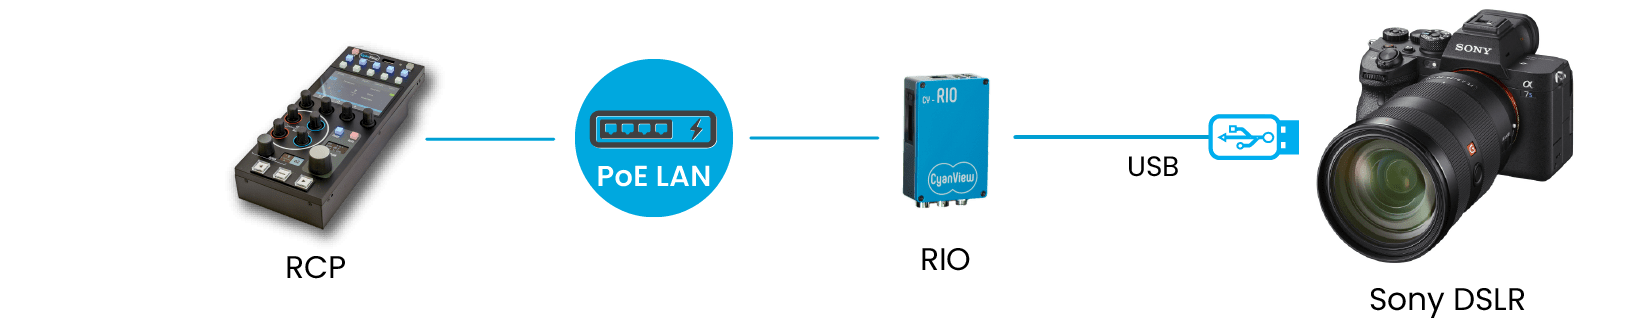 cyanview-support-Sony-DSLR-RIO-RCP-Local